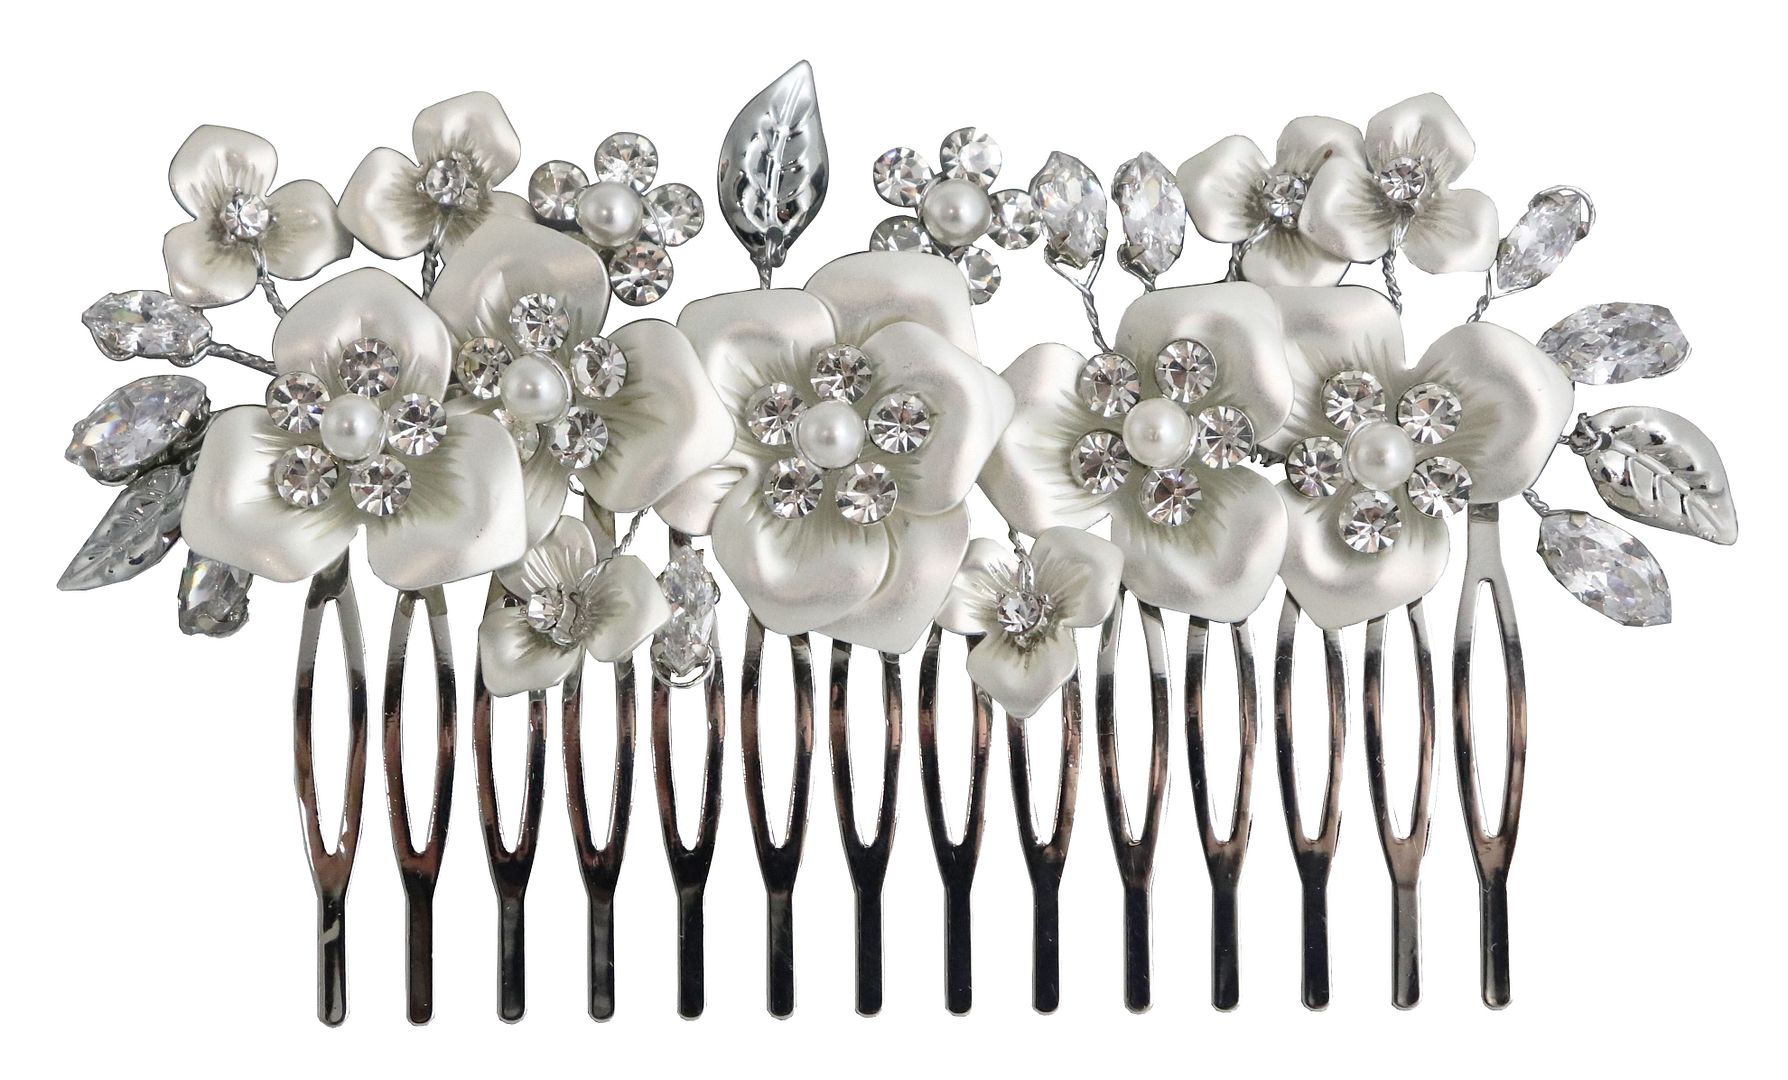 Believe by Brilliance Fine Sliver Plated Hair Comb with Genuine Cubic Zirconia and Simulated Pearls - image 1 of 1